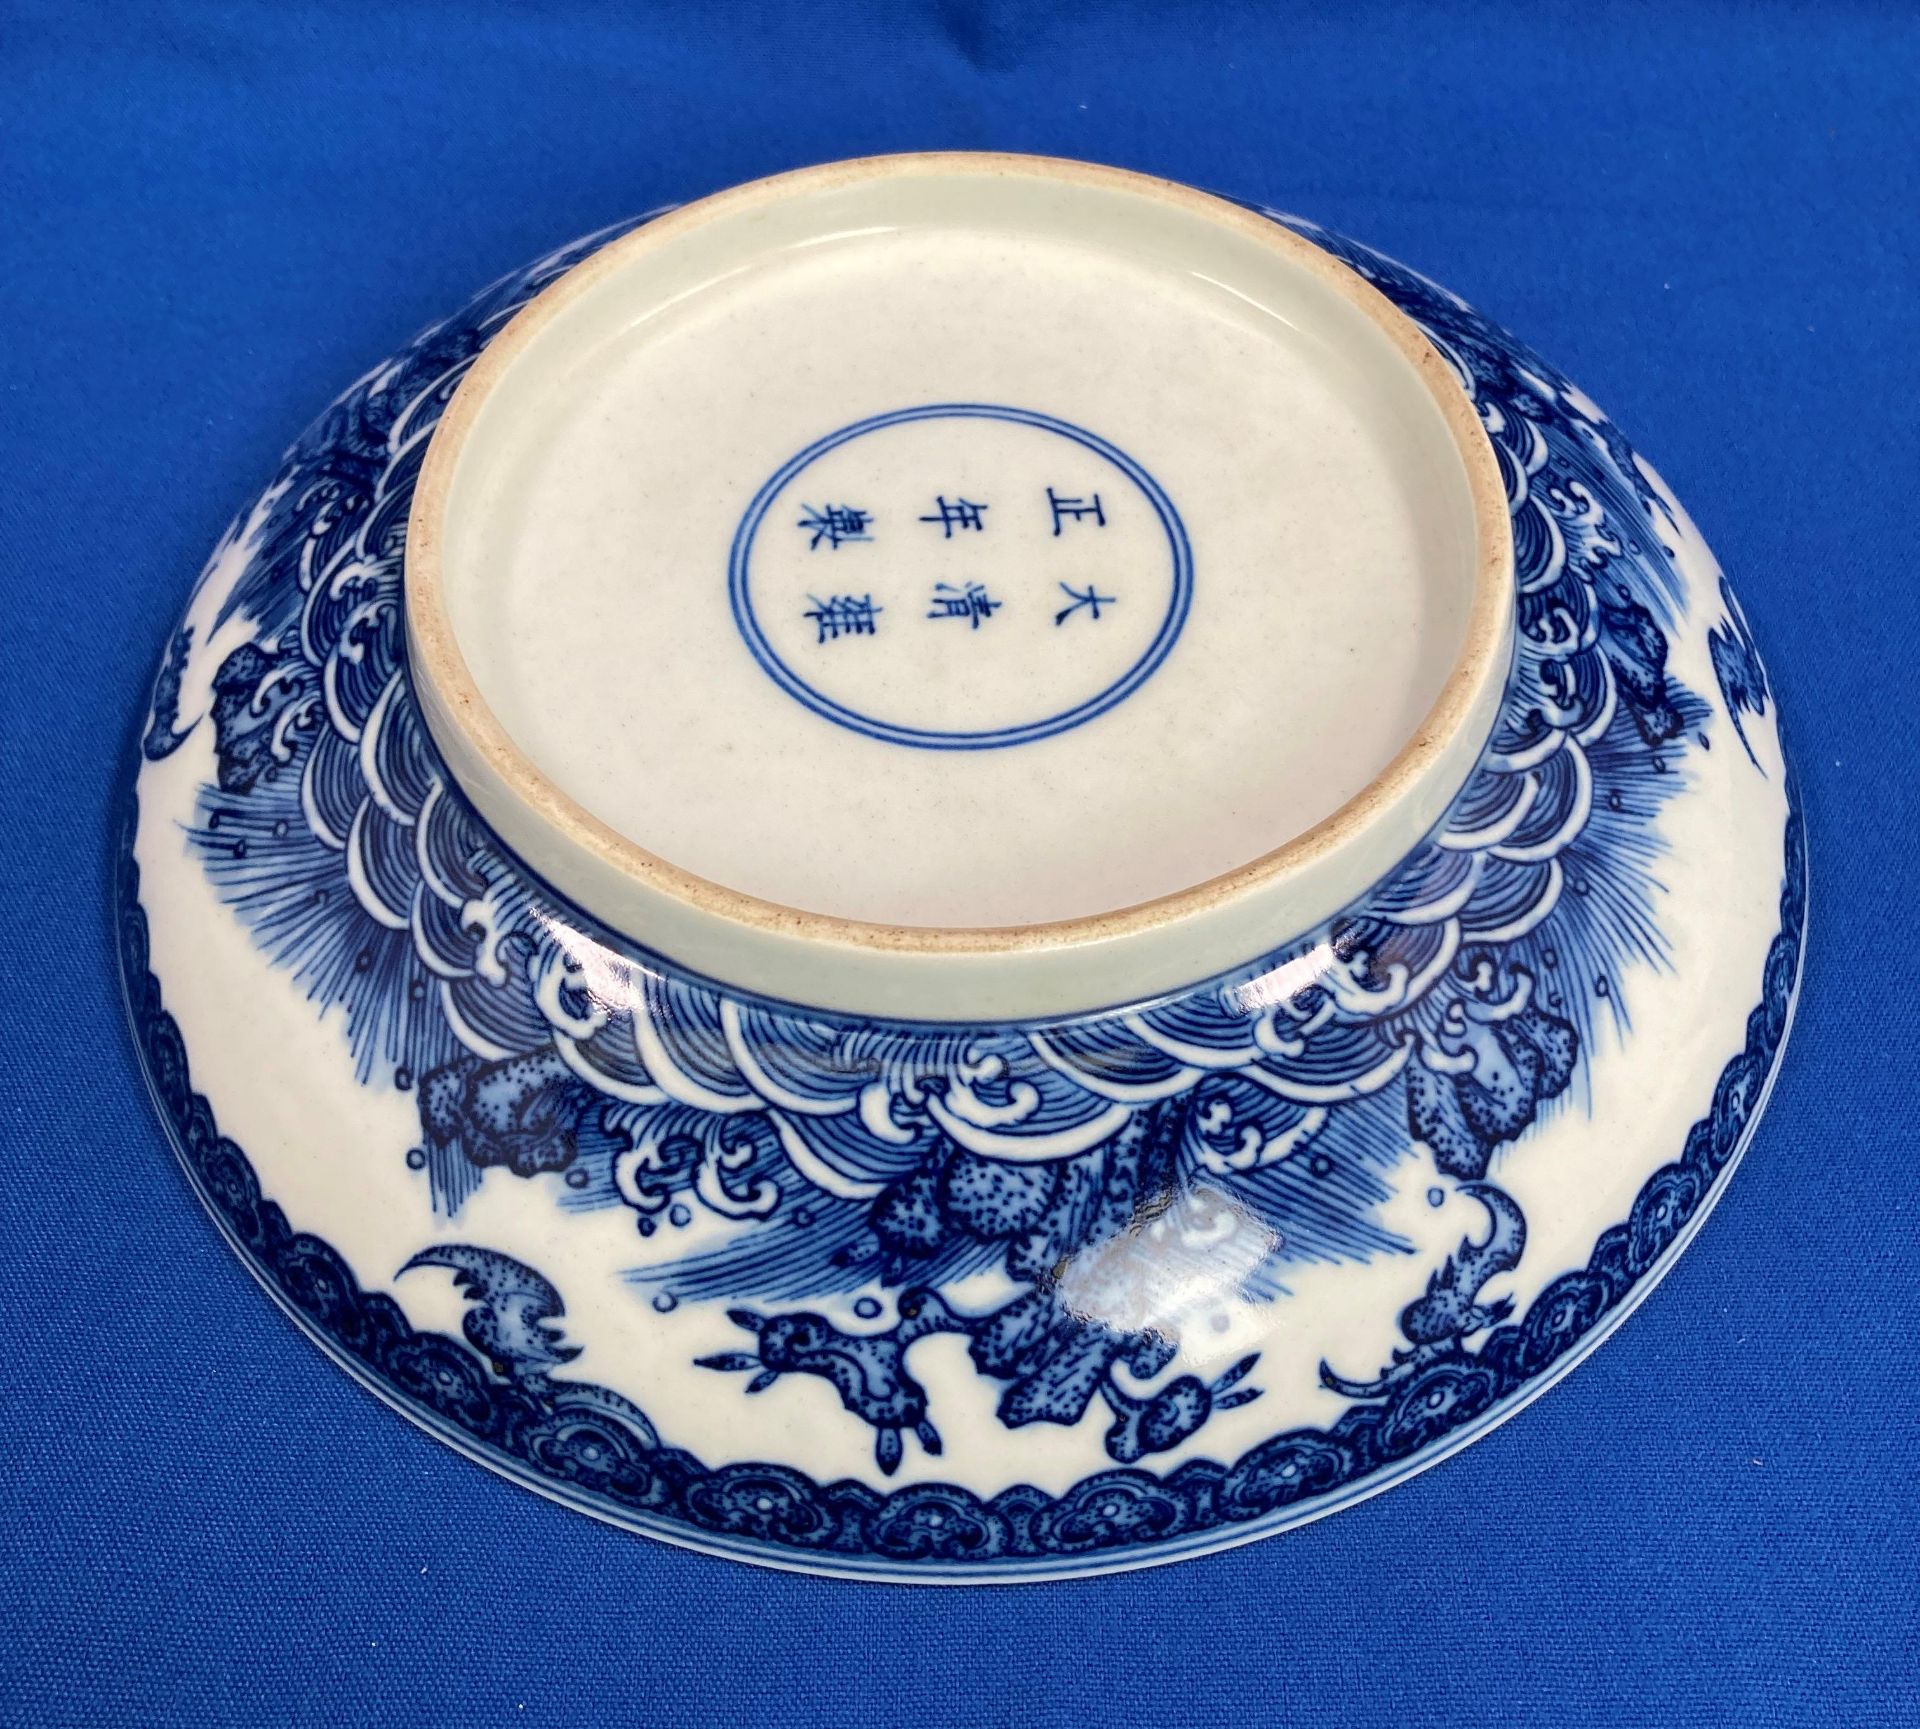 An antique 'Yongzheng' reign blue and white Oriental bowl with fig tree design and six symbol mark - Image 9 of 11